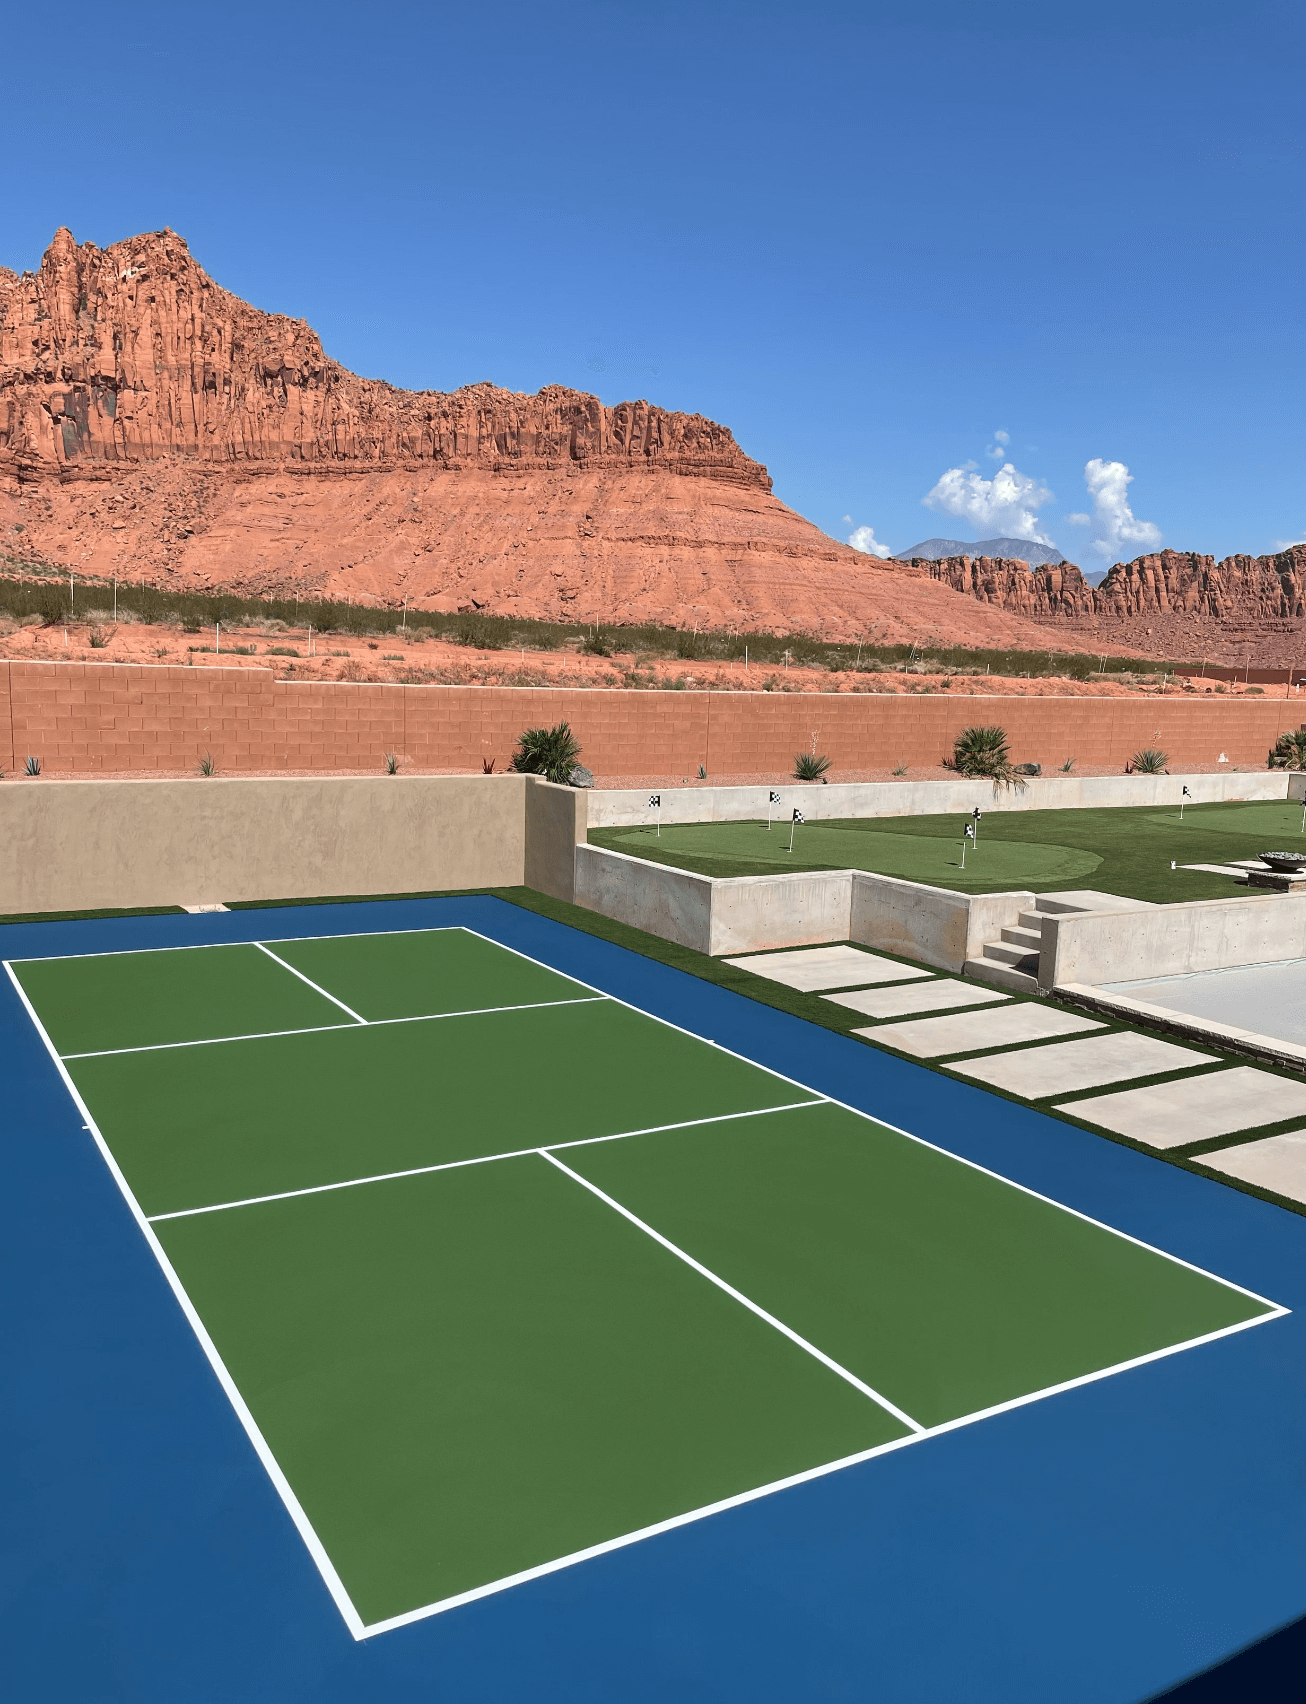 Pickleball Courts; Utah Pickleball Courts; Pickleball game; Utah County; Fastest Growing Sport in the nation; Pickleball competition